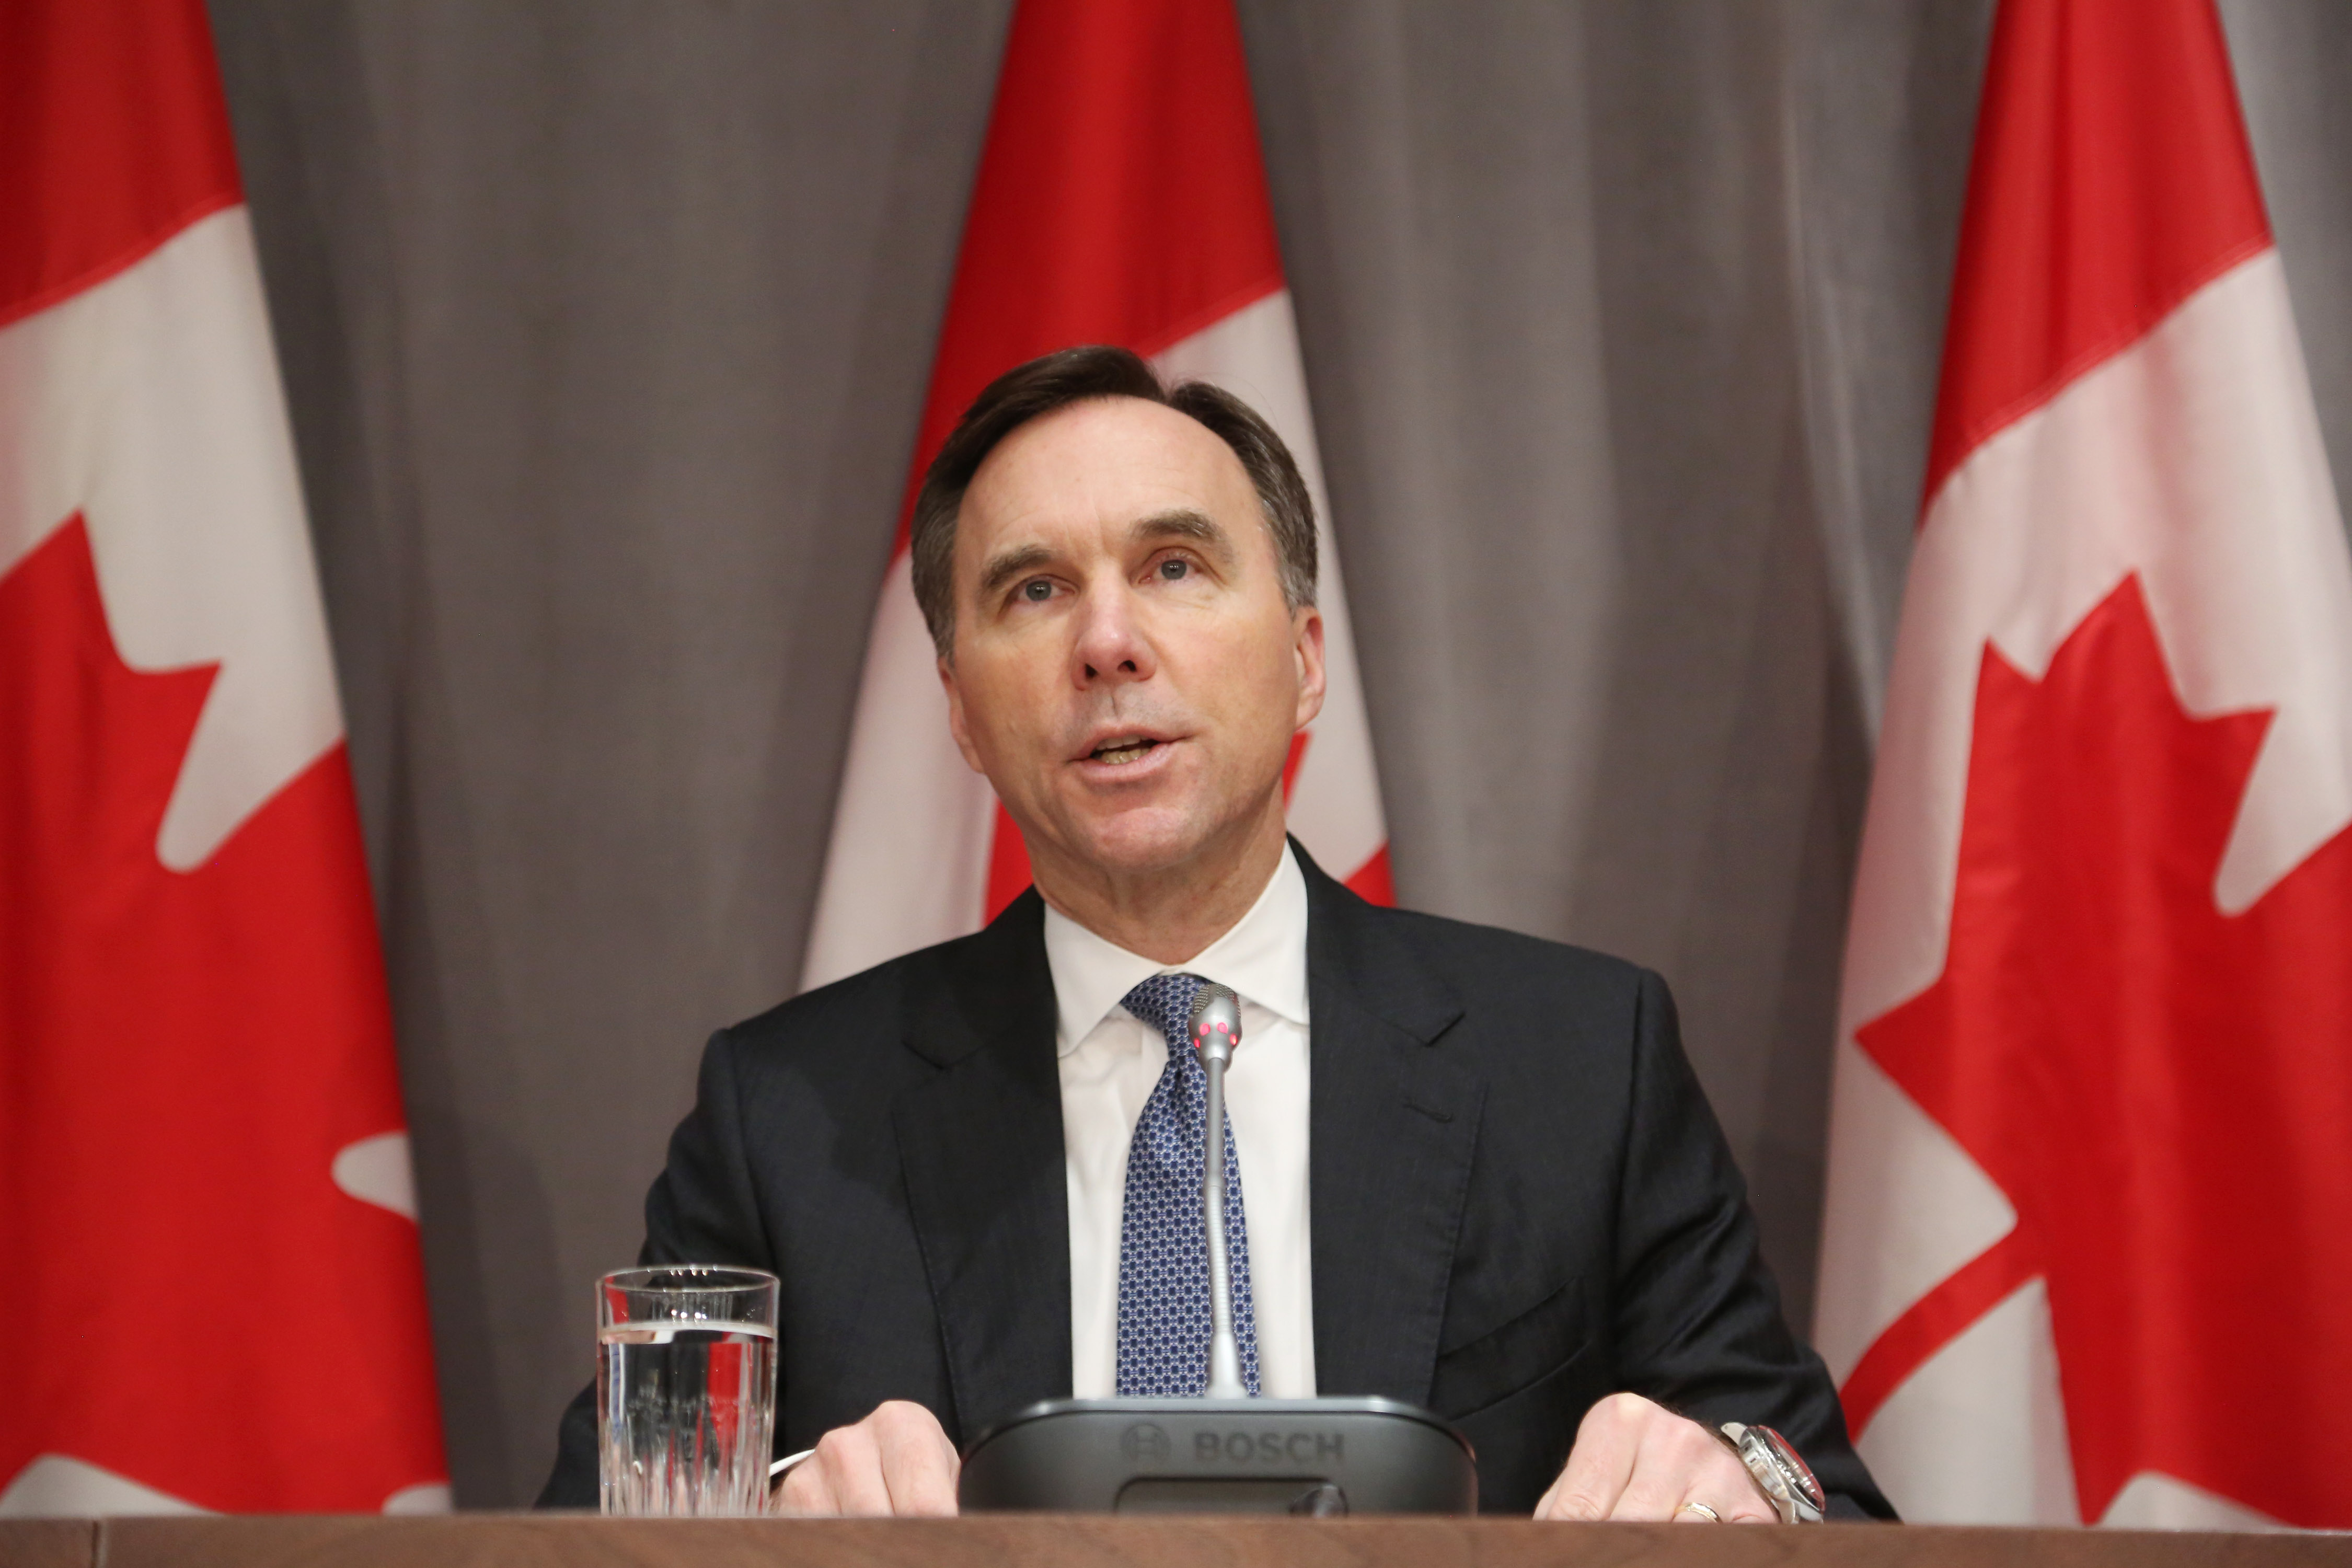 Canada's Finance Minister Bill Morneau speaks during a news conference on Parliament Hill March 18, 2020 in Ottawa, Ontario. - Canadian Prime Minister Justin Trudeau announced Can$27 billion in direct aid on March 18, 2020 to help workers and businesses cope with the economic impacts of the coronavirus pandemic.He said tax payments worth an estimated Can$55 billion could be deferred until August. (Photo by Dave Chan / AFP) (Photo by DAVE CHAN/AFP via Getty Images)